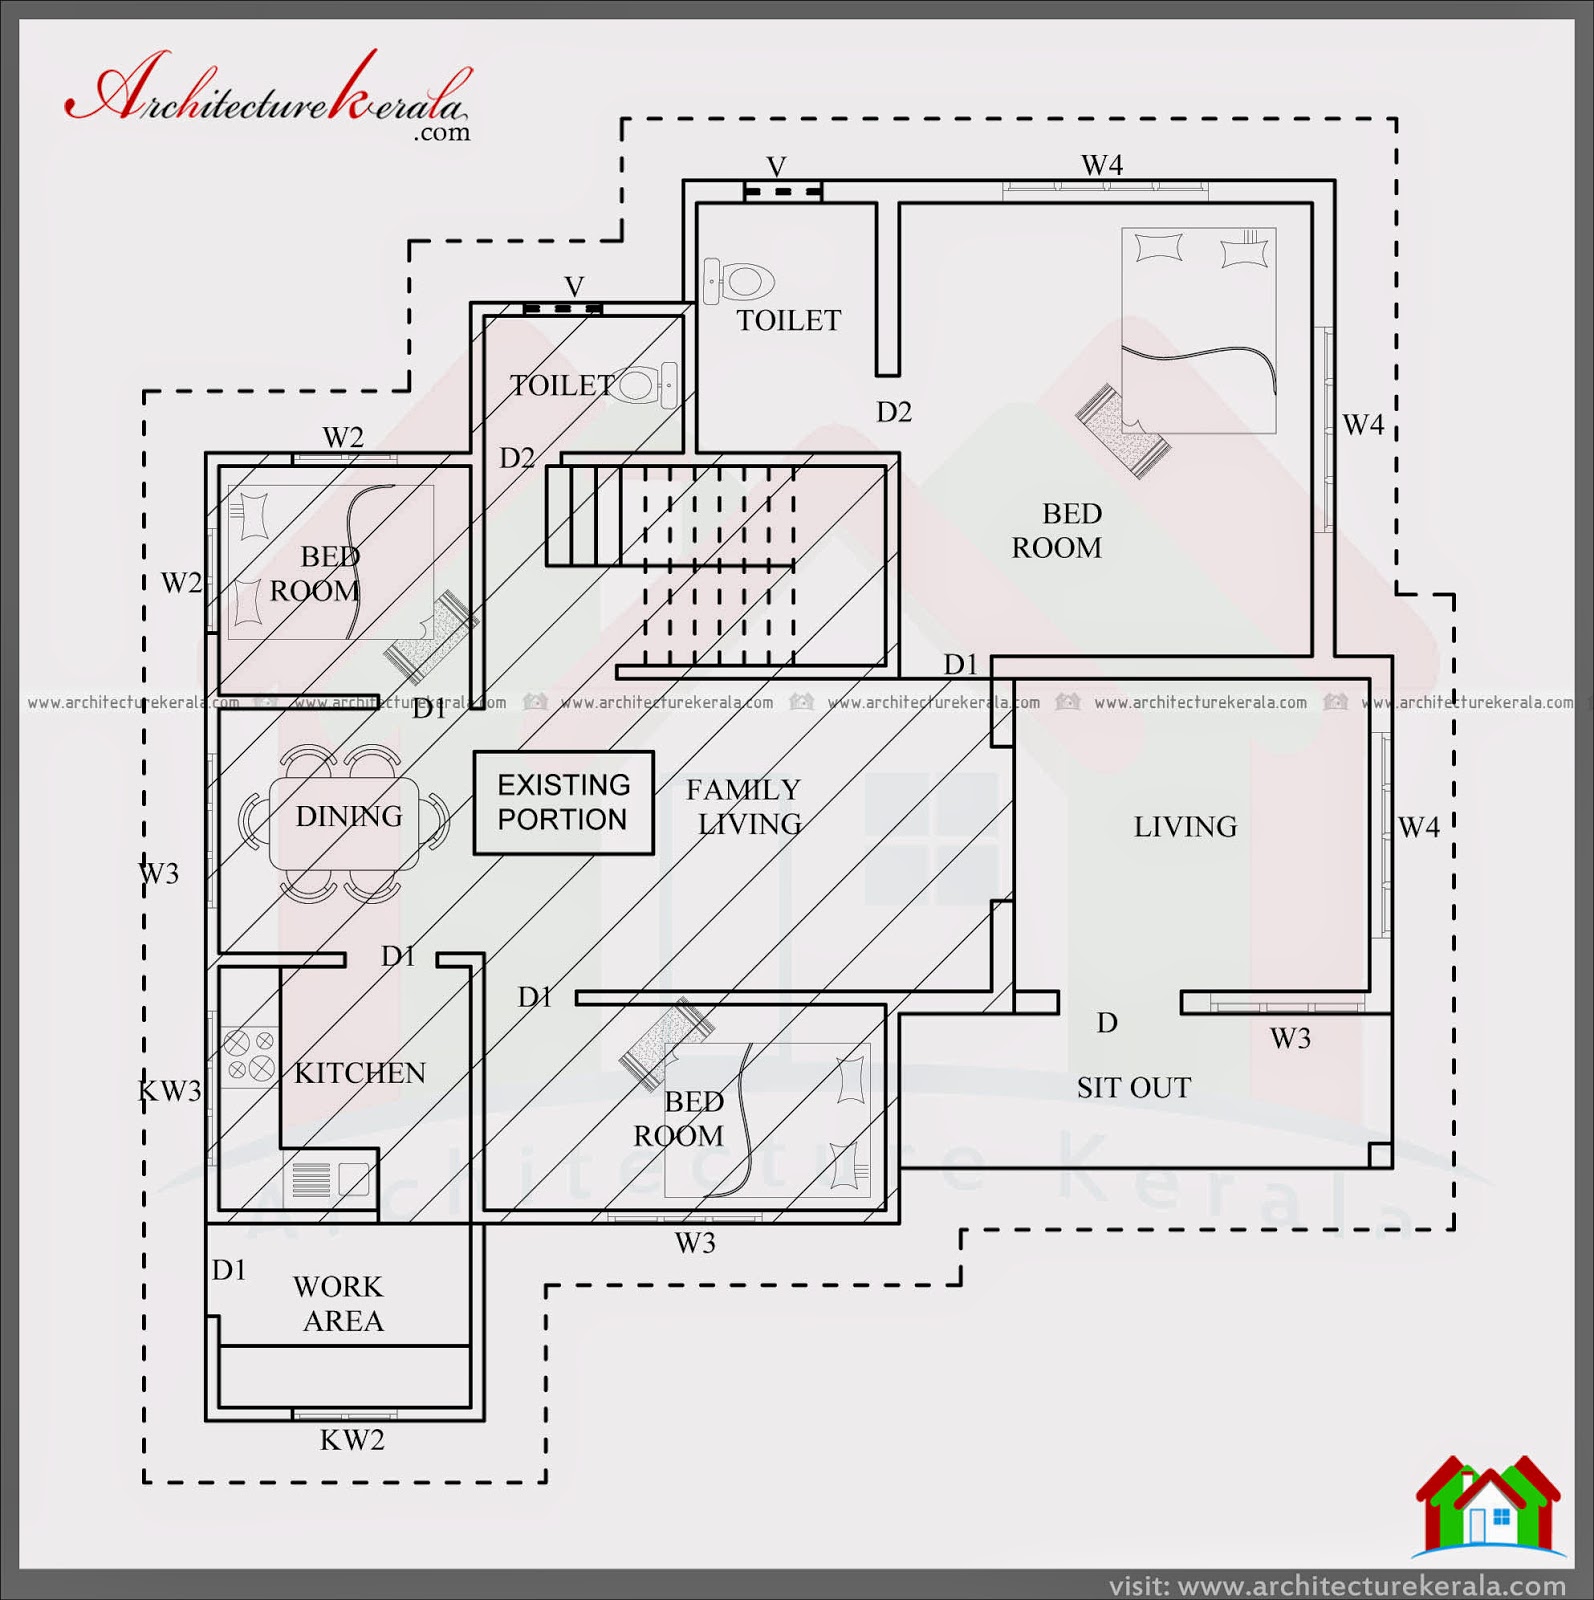  5  BEDROOM  IN 2000 SFT HOUSE  PLAN  ARCHITECTURE KERALA 